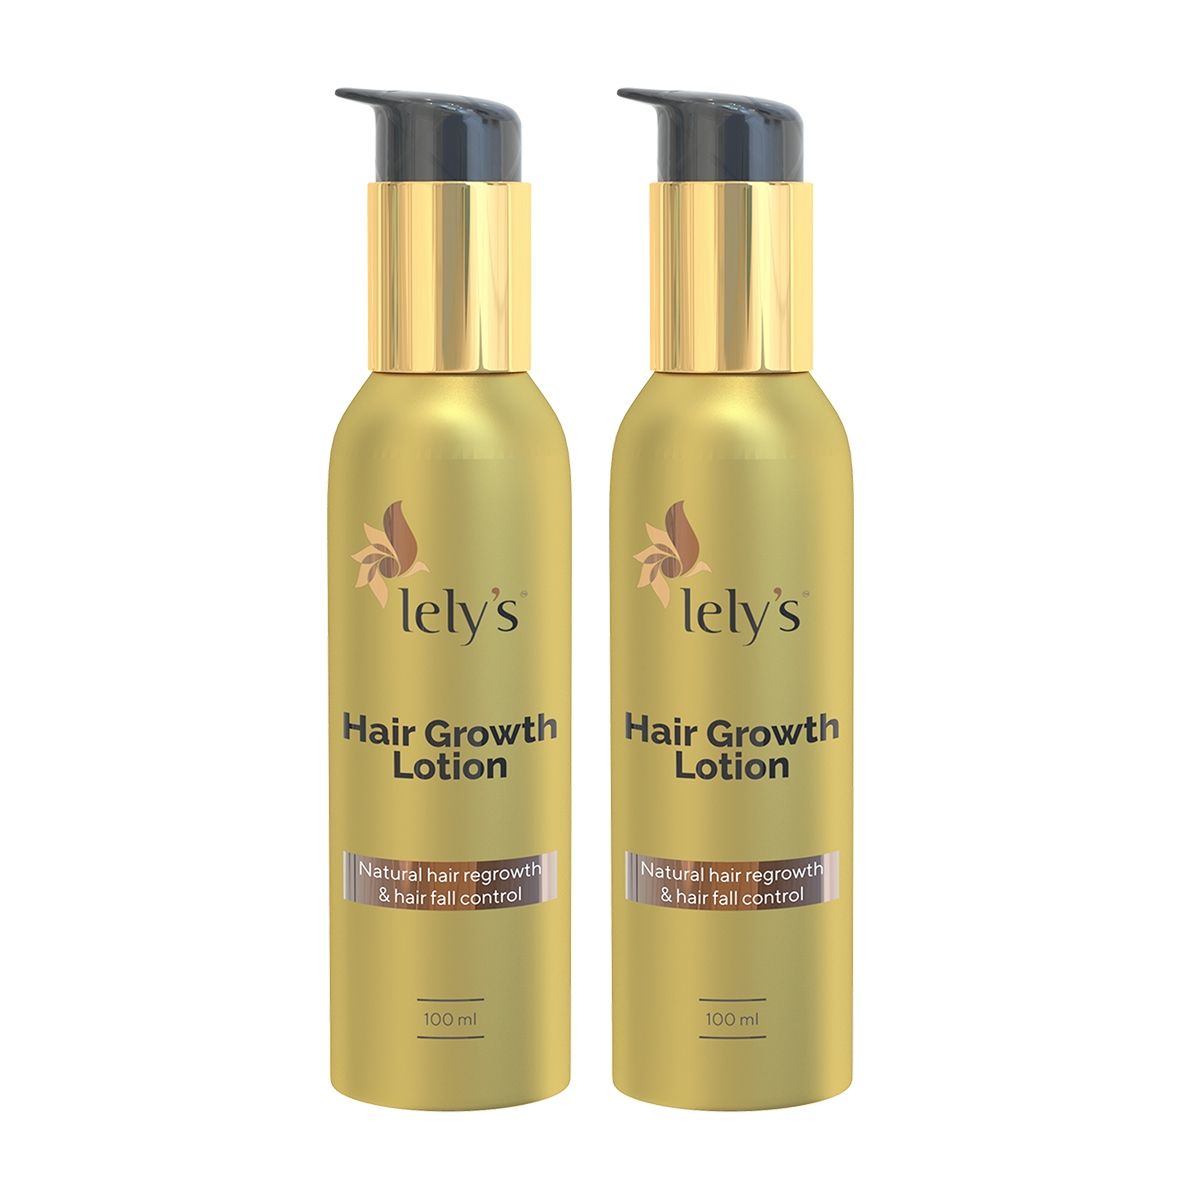 lely's | Lely's Hair Growth Lotion For Both Male And Female - Reduces Hairfall, Promotes Hair Growth, Strengthens Hair, For All Hair Types, Improve Scalp Conditions, Reduces Thinning Hair - 100 Ml Pack of 2